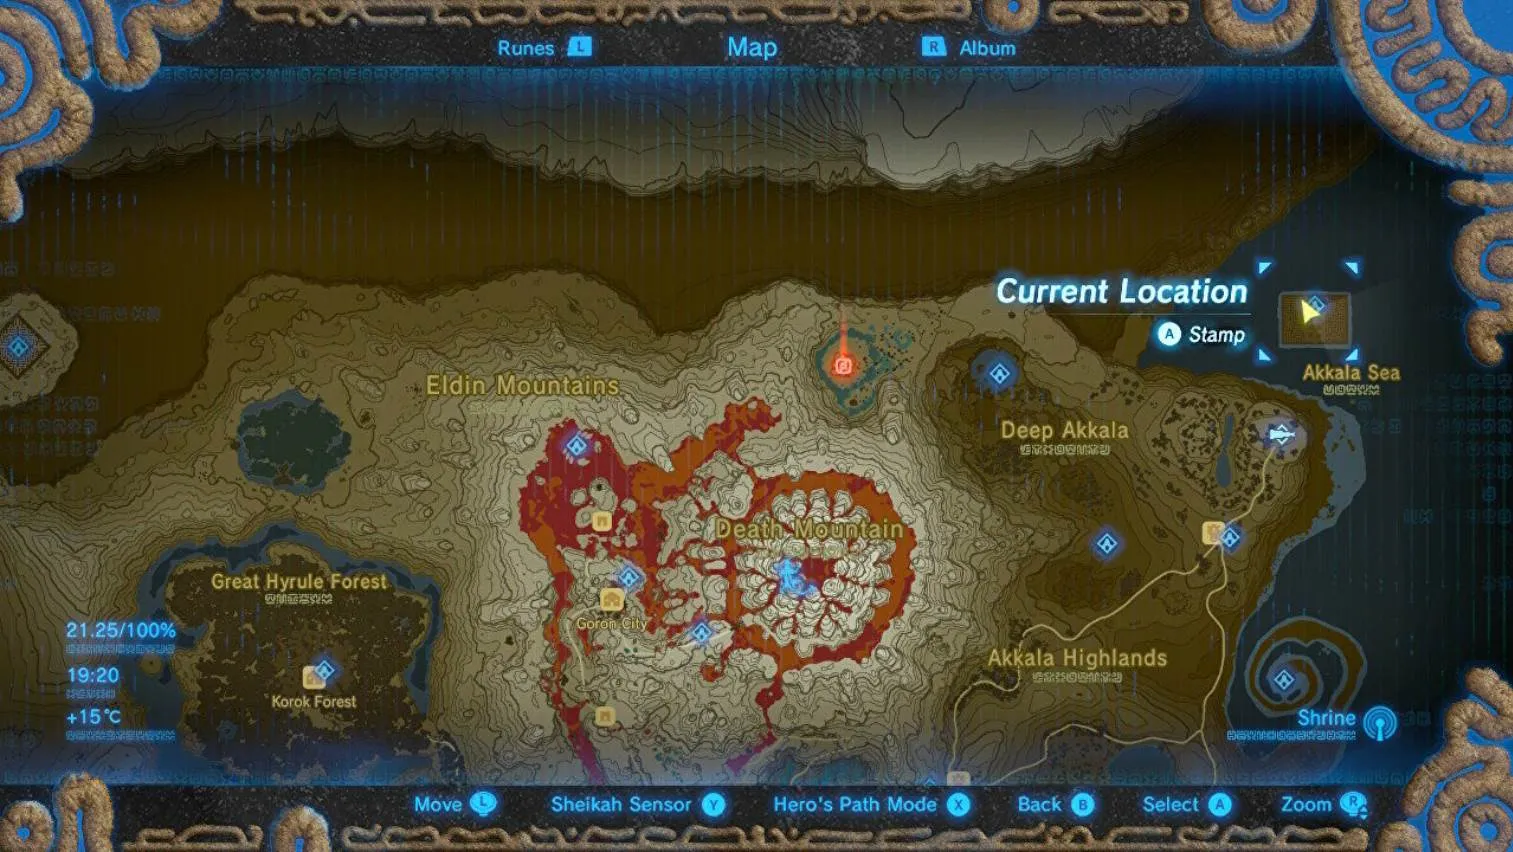 How Many Labyrinths Are in The Legend of Zelda: Breath of the Wild?